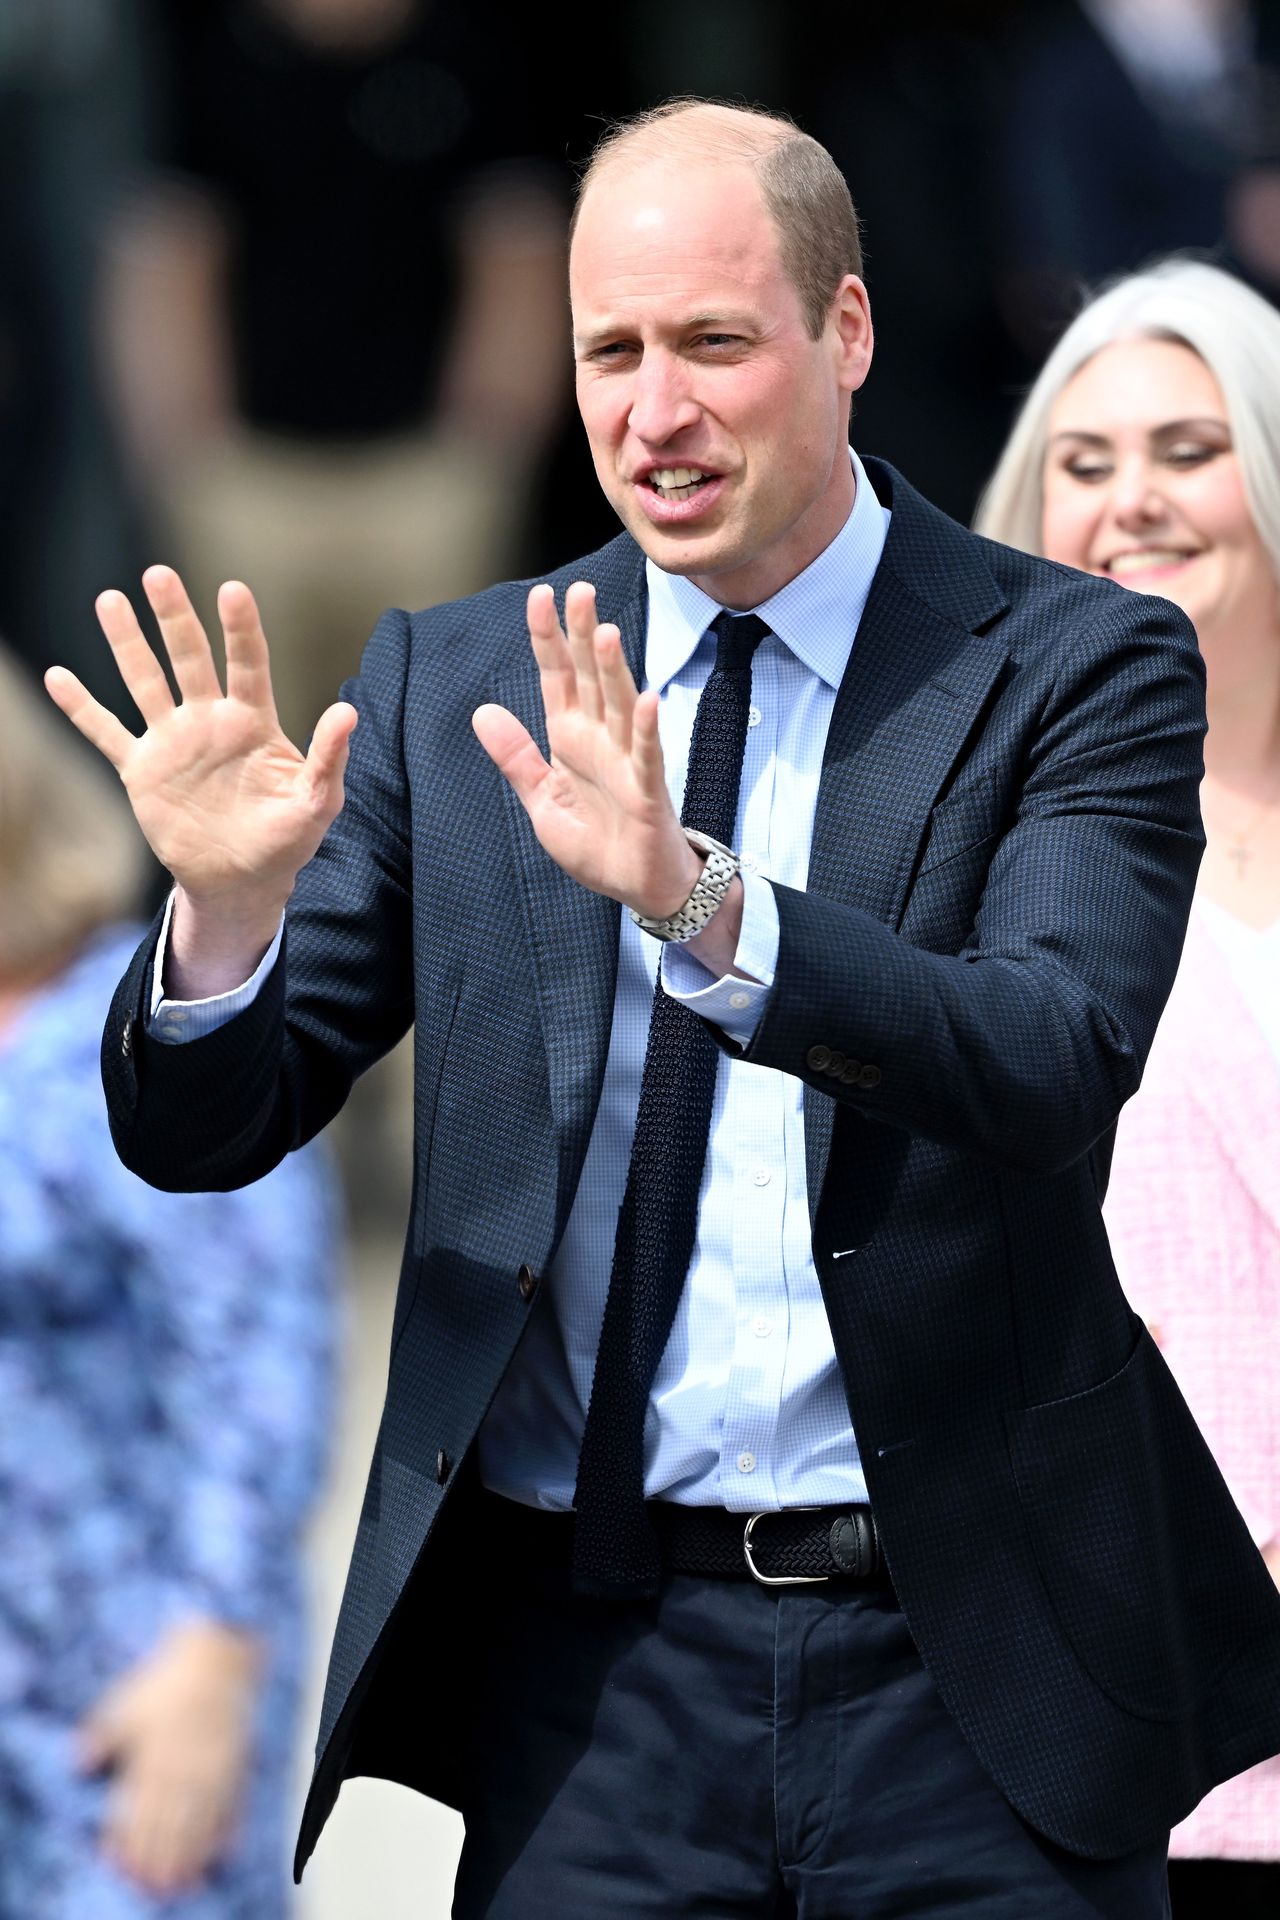 Prince William returned to his duties.